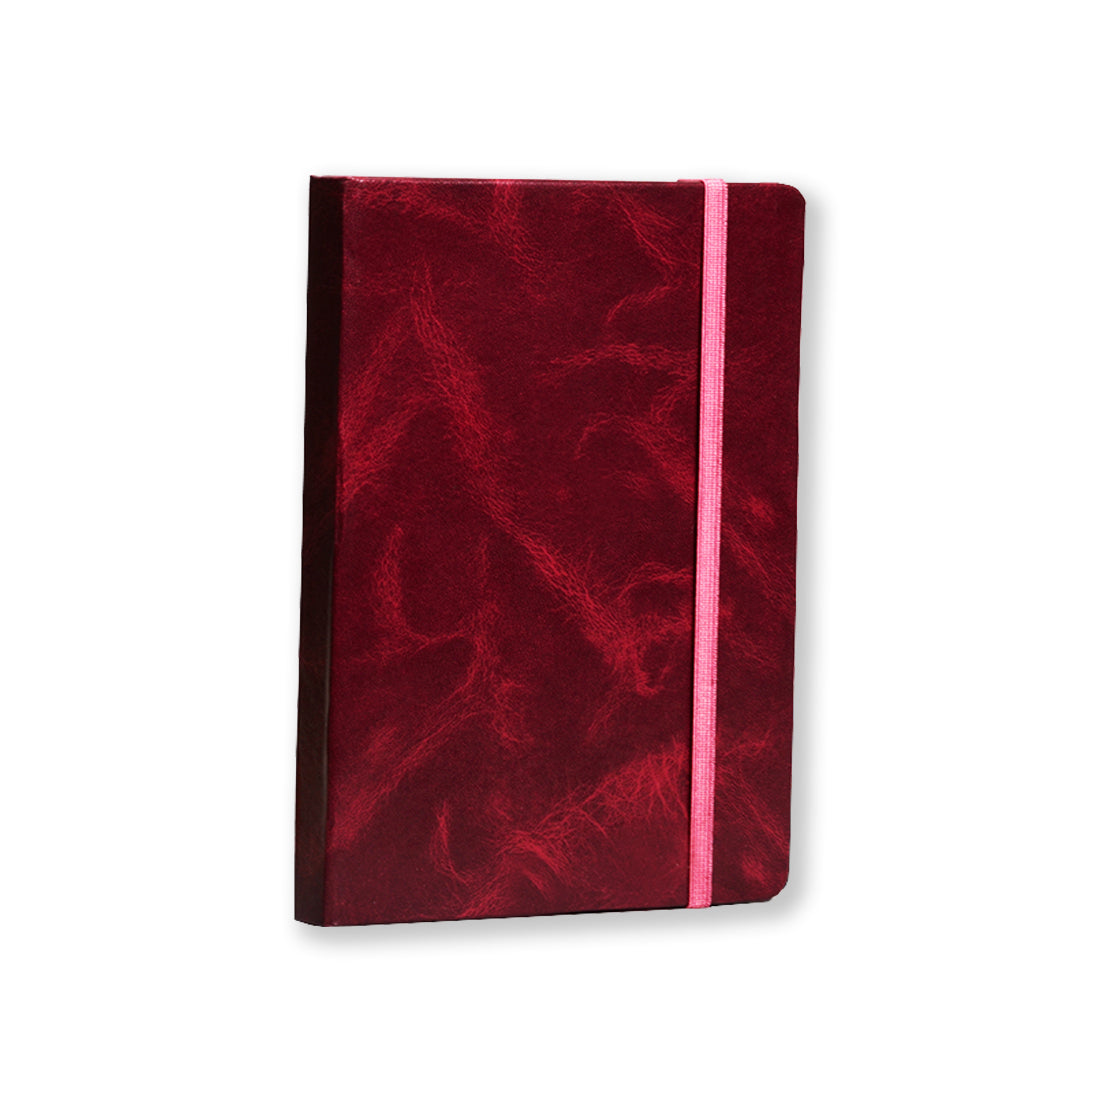 Red Journal 240 Pages, Hardcover, Un- Ruled Pages, 5.5x 8.25-Inch for Men & Women…